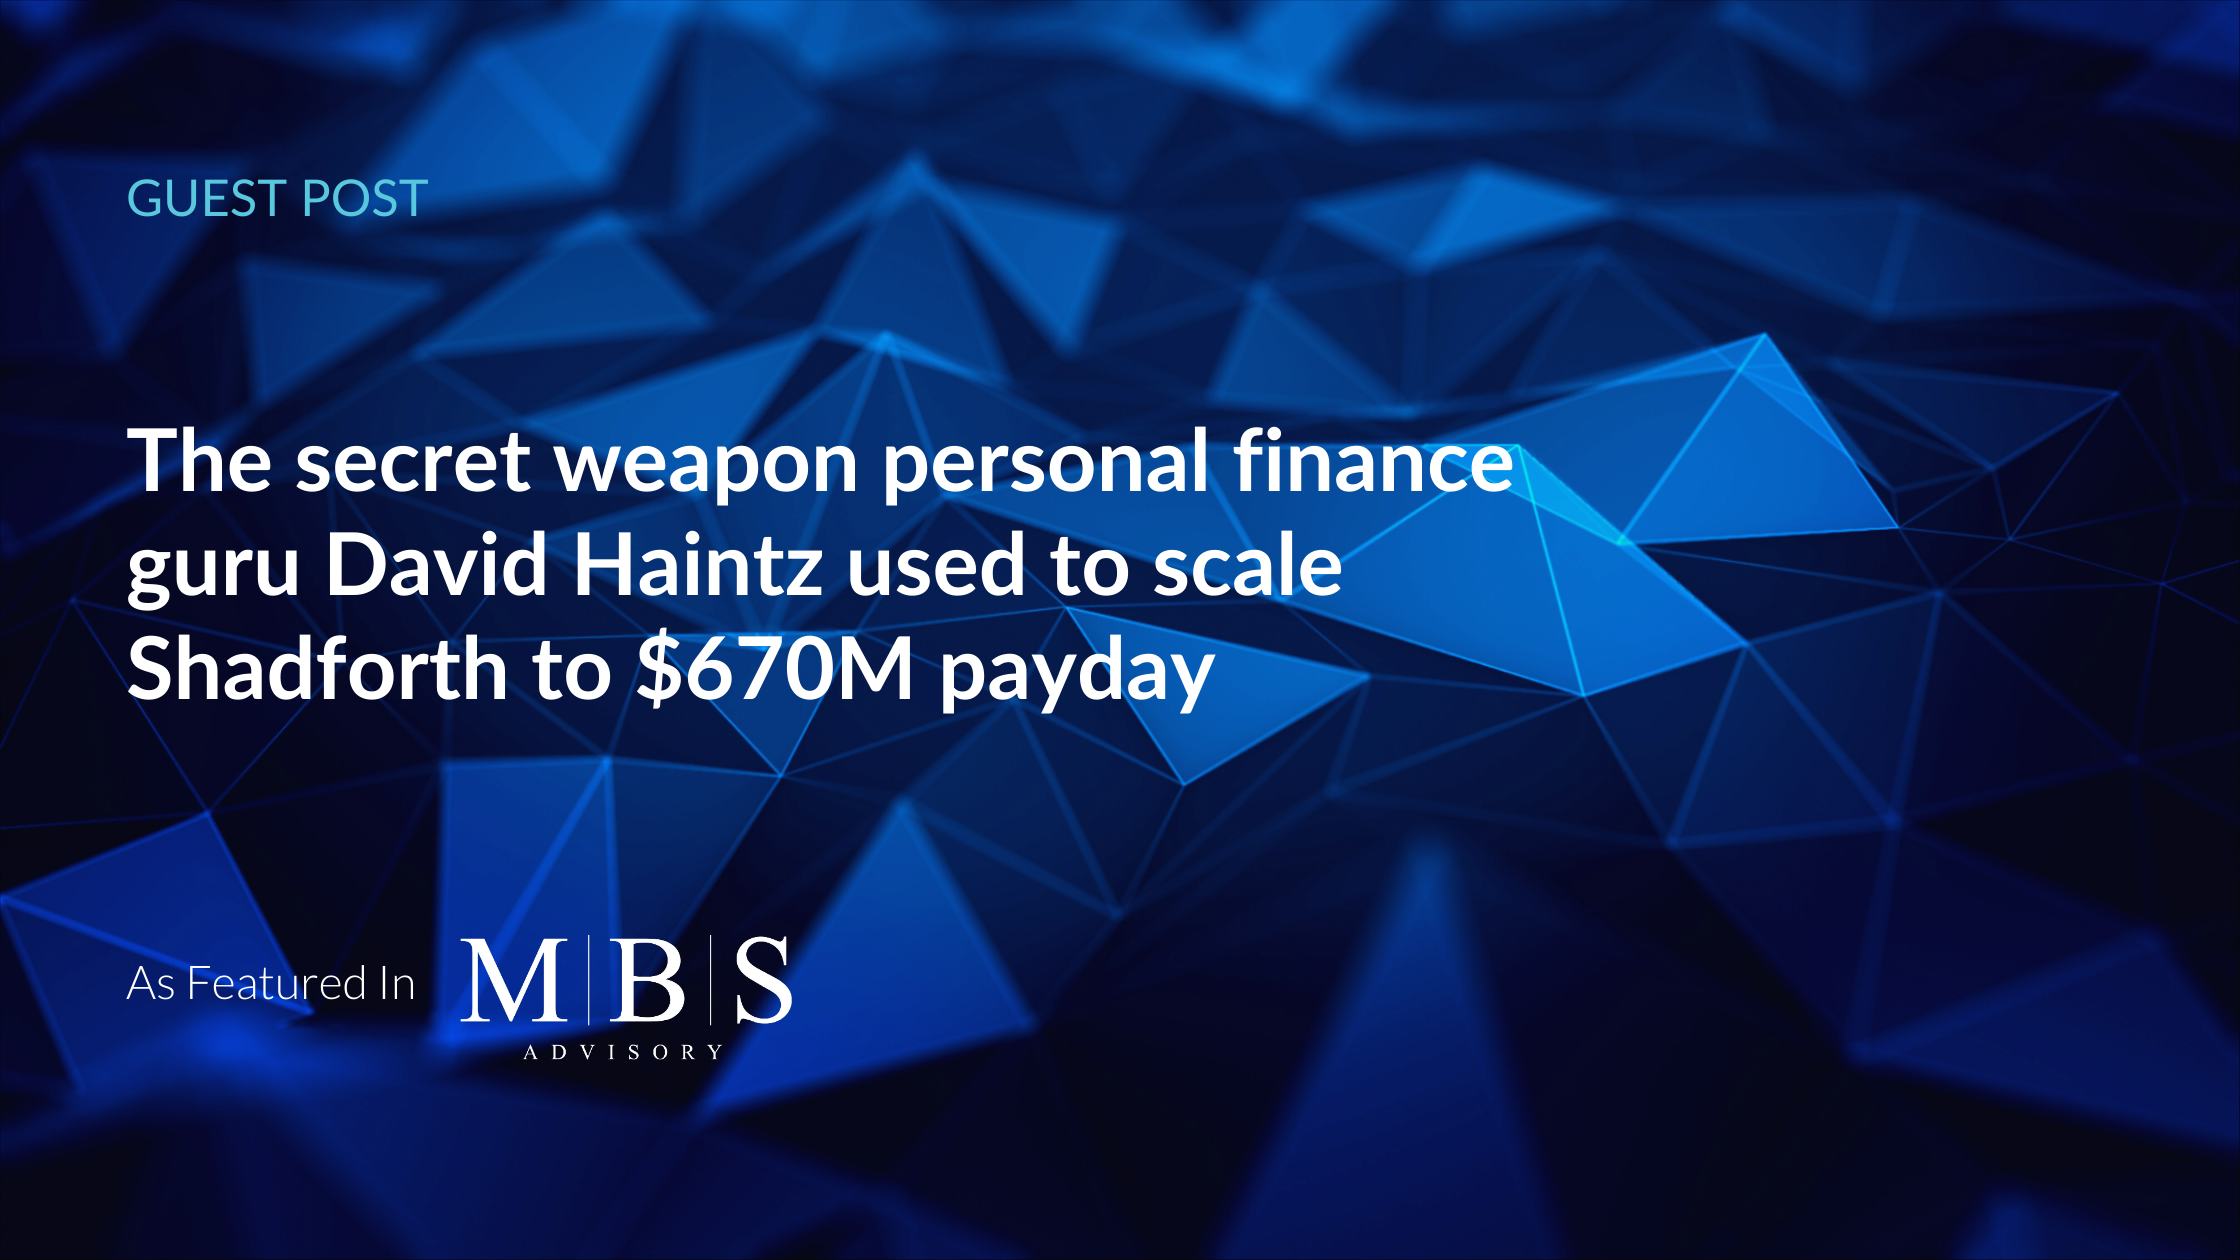 David Haintz - Guest Post: The secret weapon personal finance guru David Haintz, AM used to scale Shadforth to $670M payday